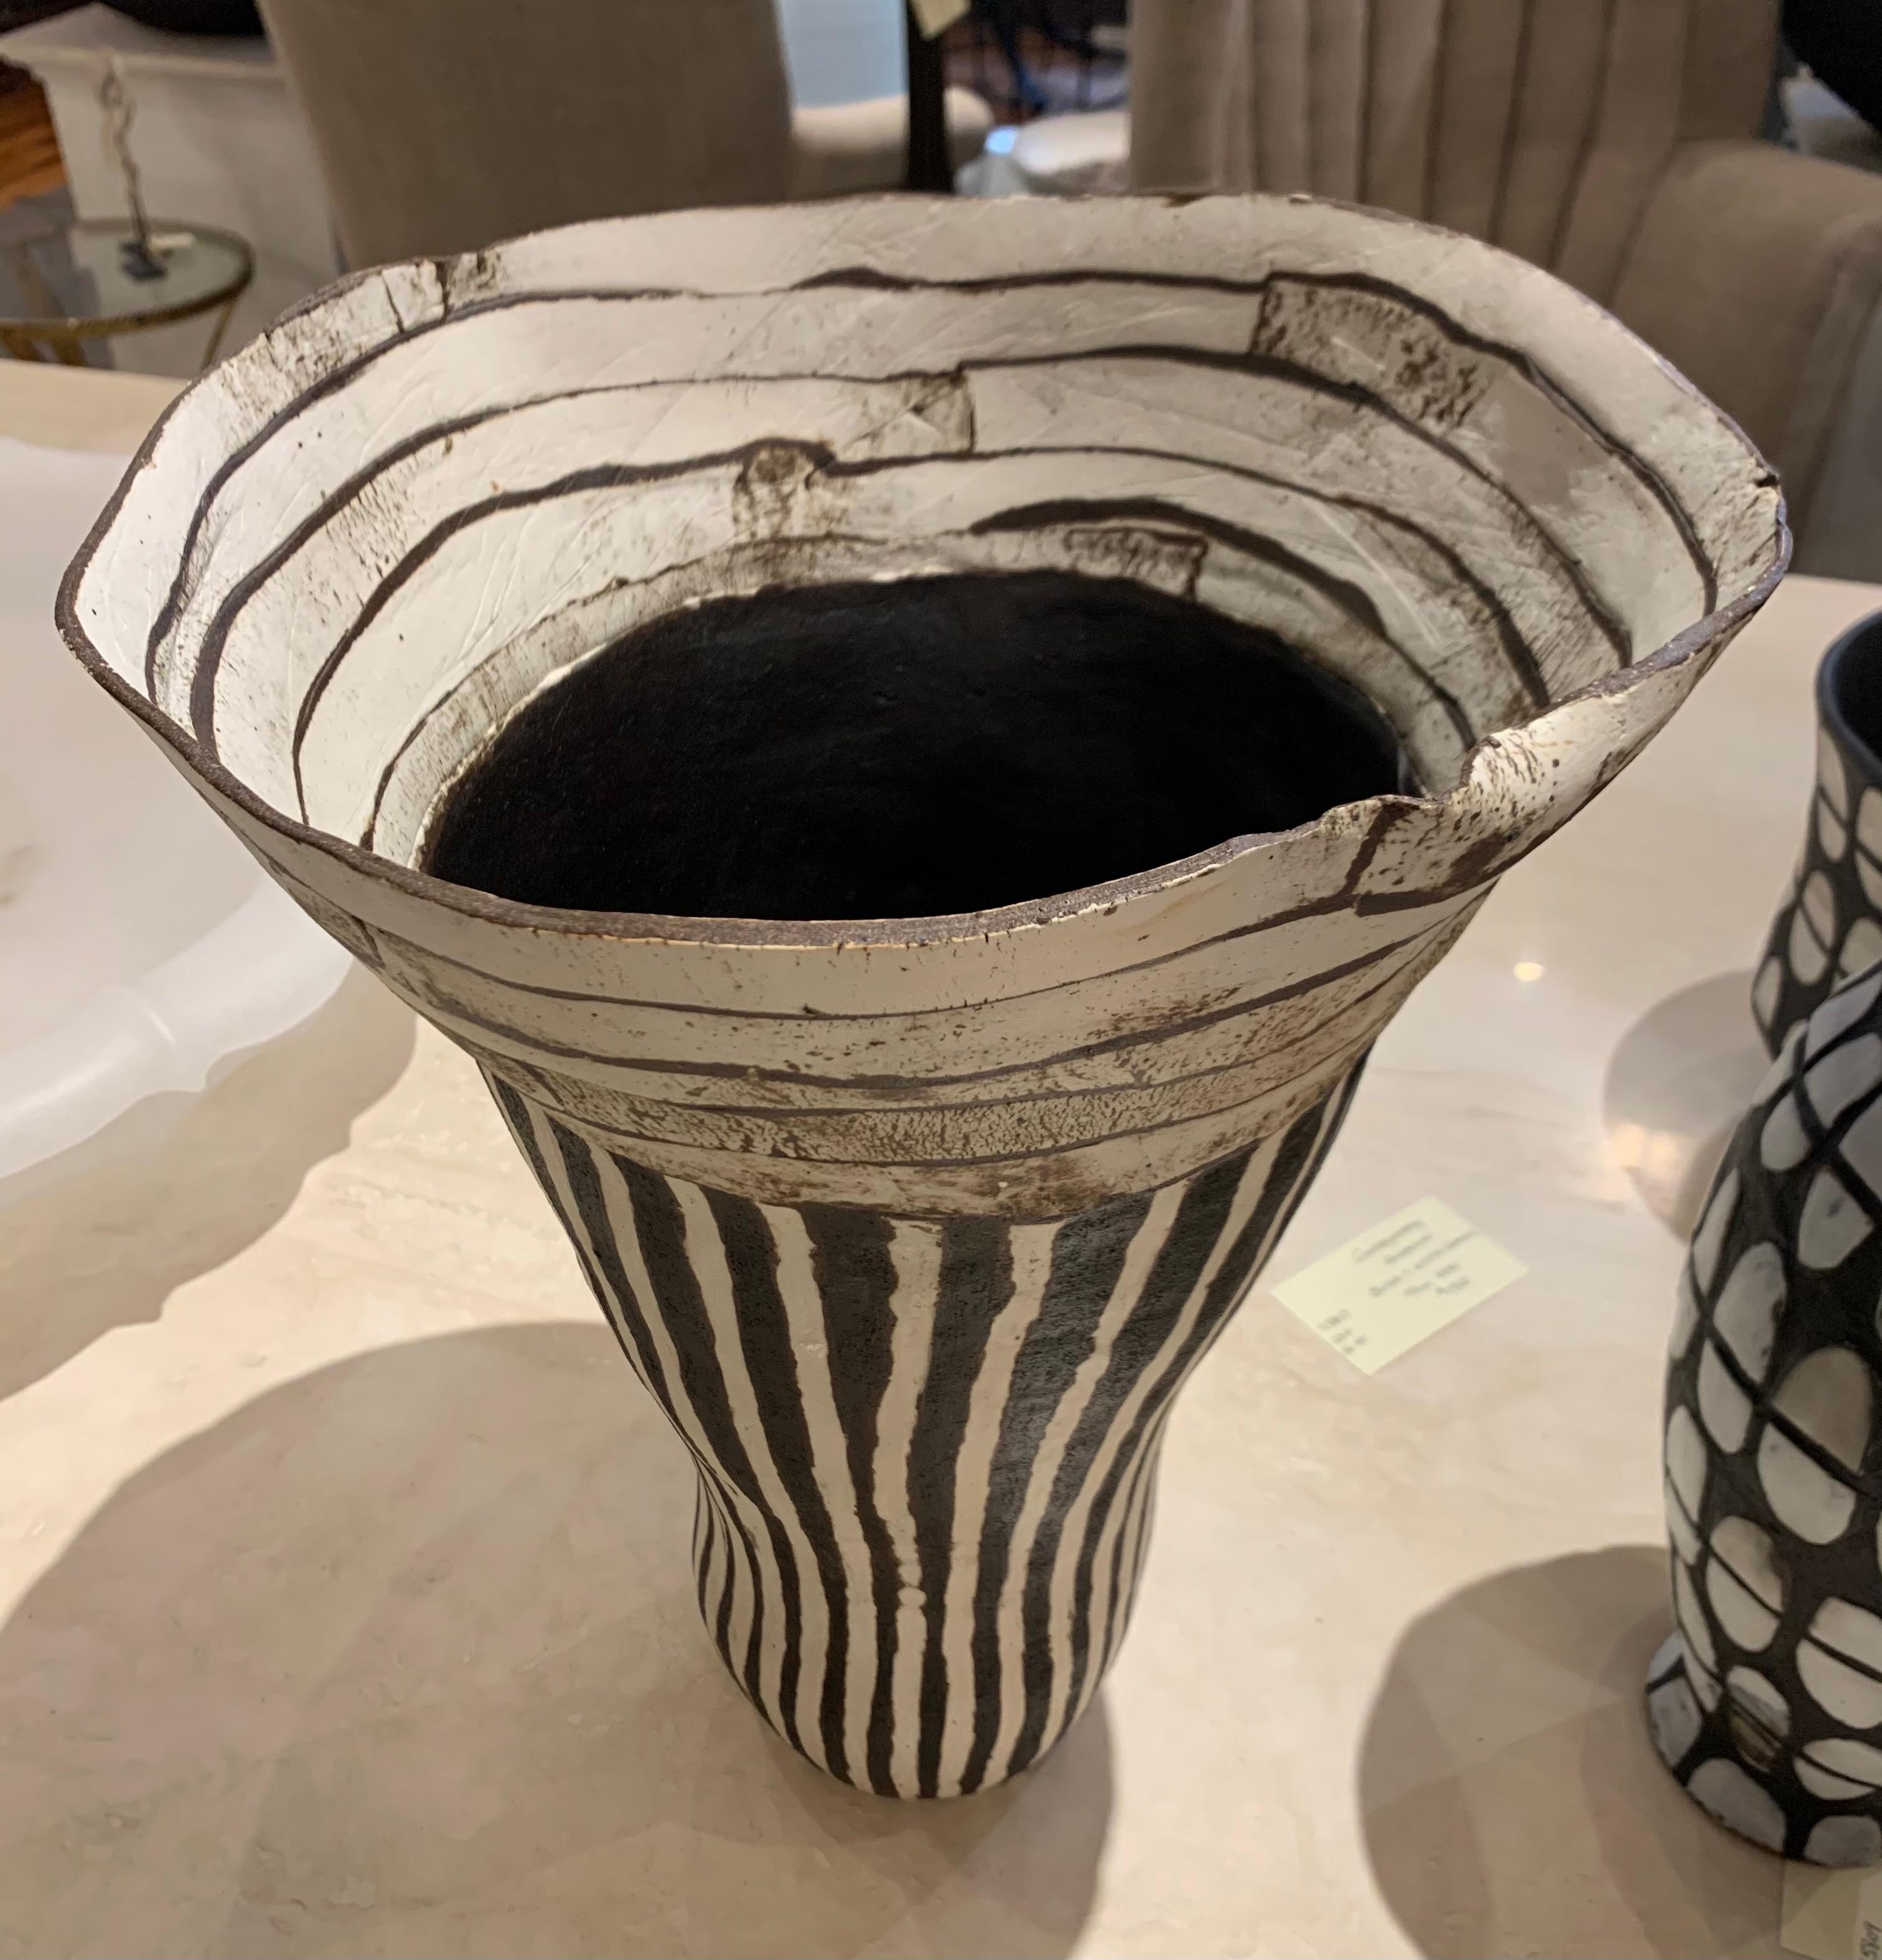 Contemporary American ceramicist Brenda Holzke hand made unique one of a kind tall ceramic vase that is hand built and made of dark stoneware and
porcelain slip. 
Wide organically shaped opening with horizontal stripes on the upper third and